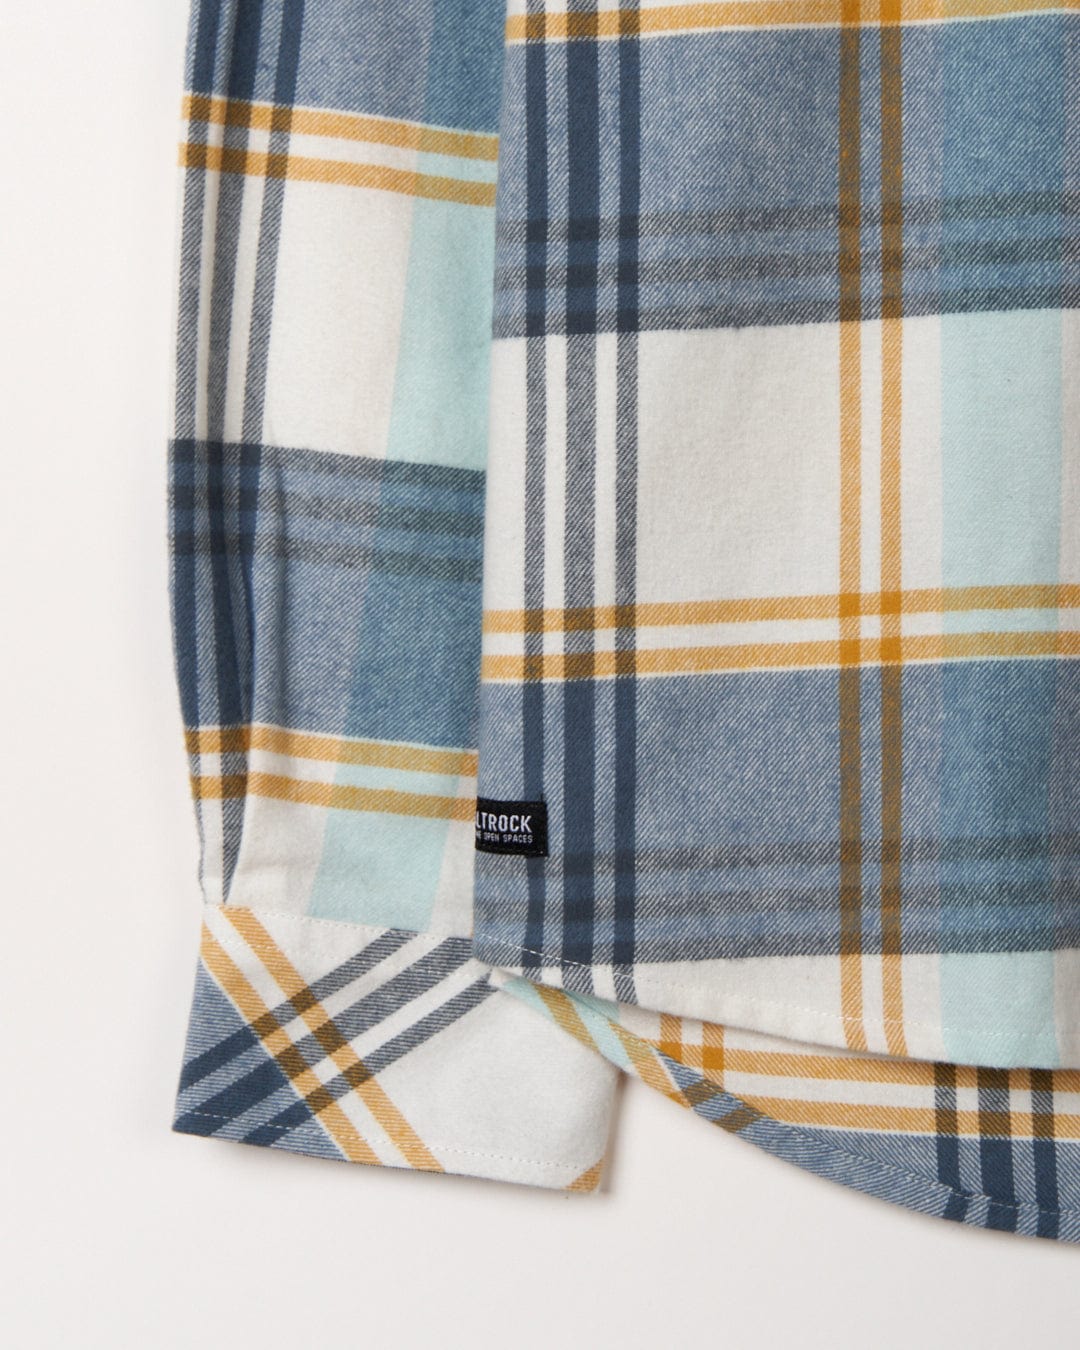 Plaid flannel fabric with a 'Miles' label on a white background.